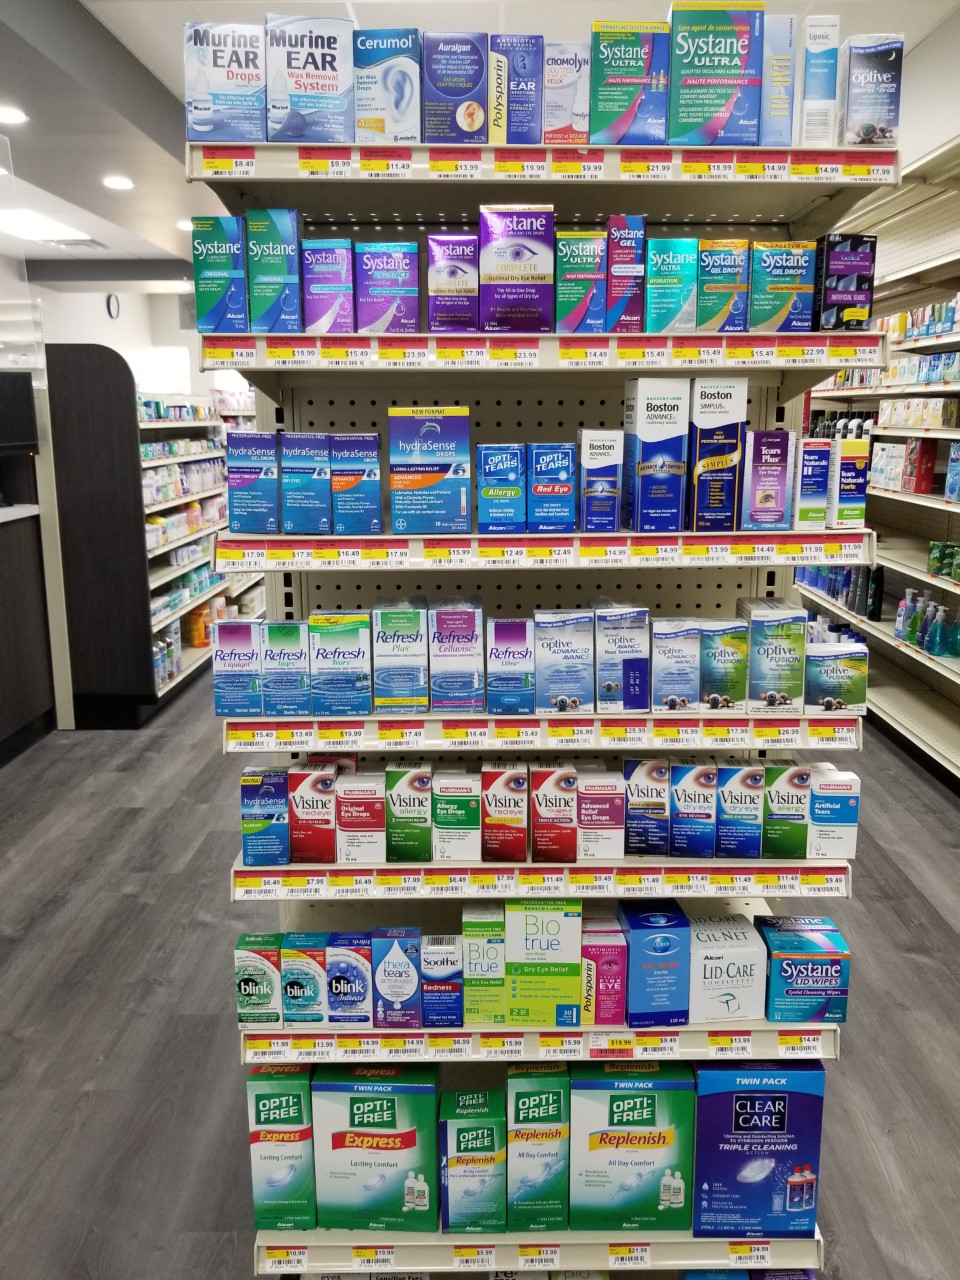 Pharmasave Timberlands | health | 20 Thomlison Ave #5101, Red Deer, AB T4P 3C7, Canada | 4039863755 OR +1 403-986-3755